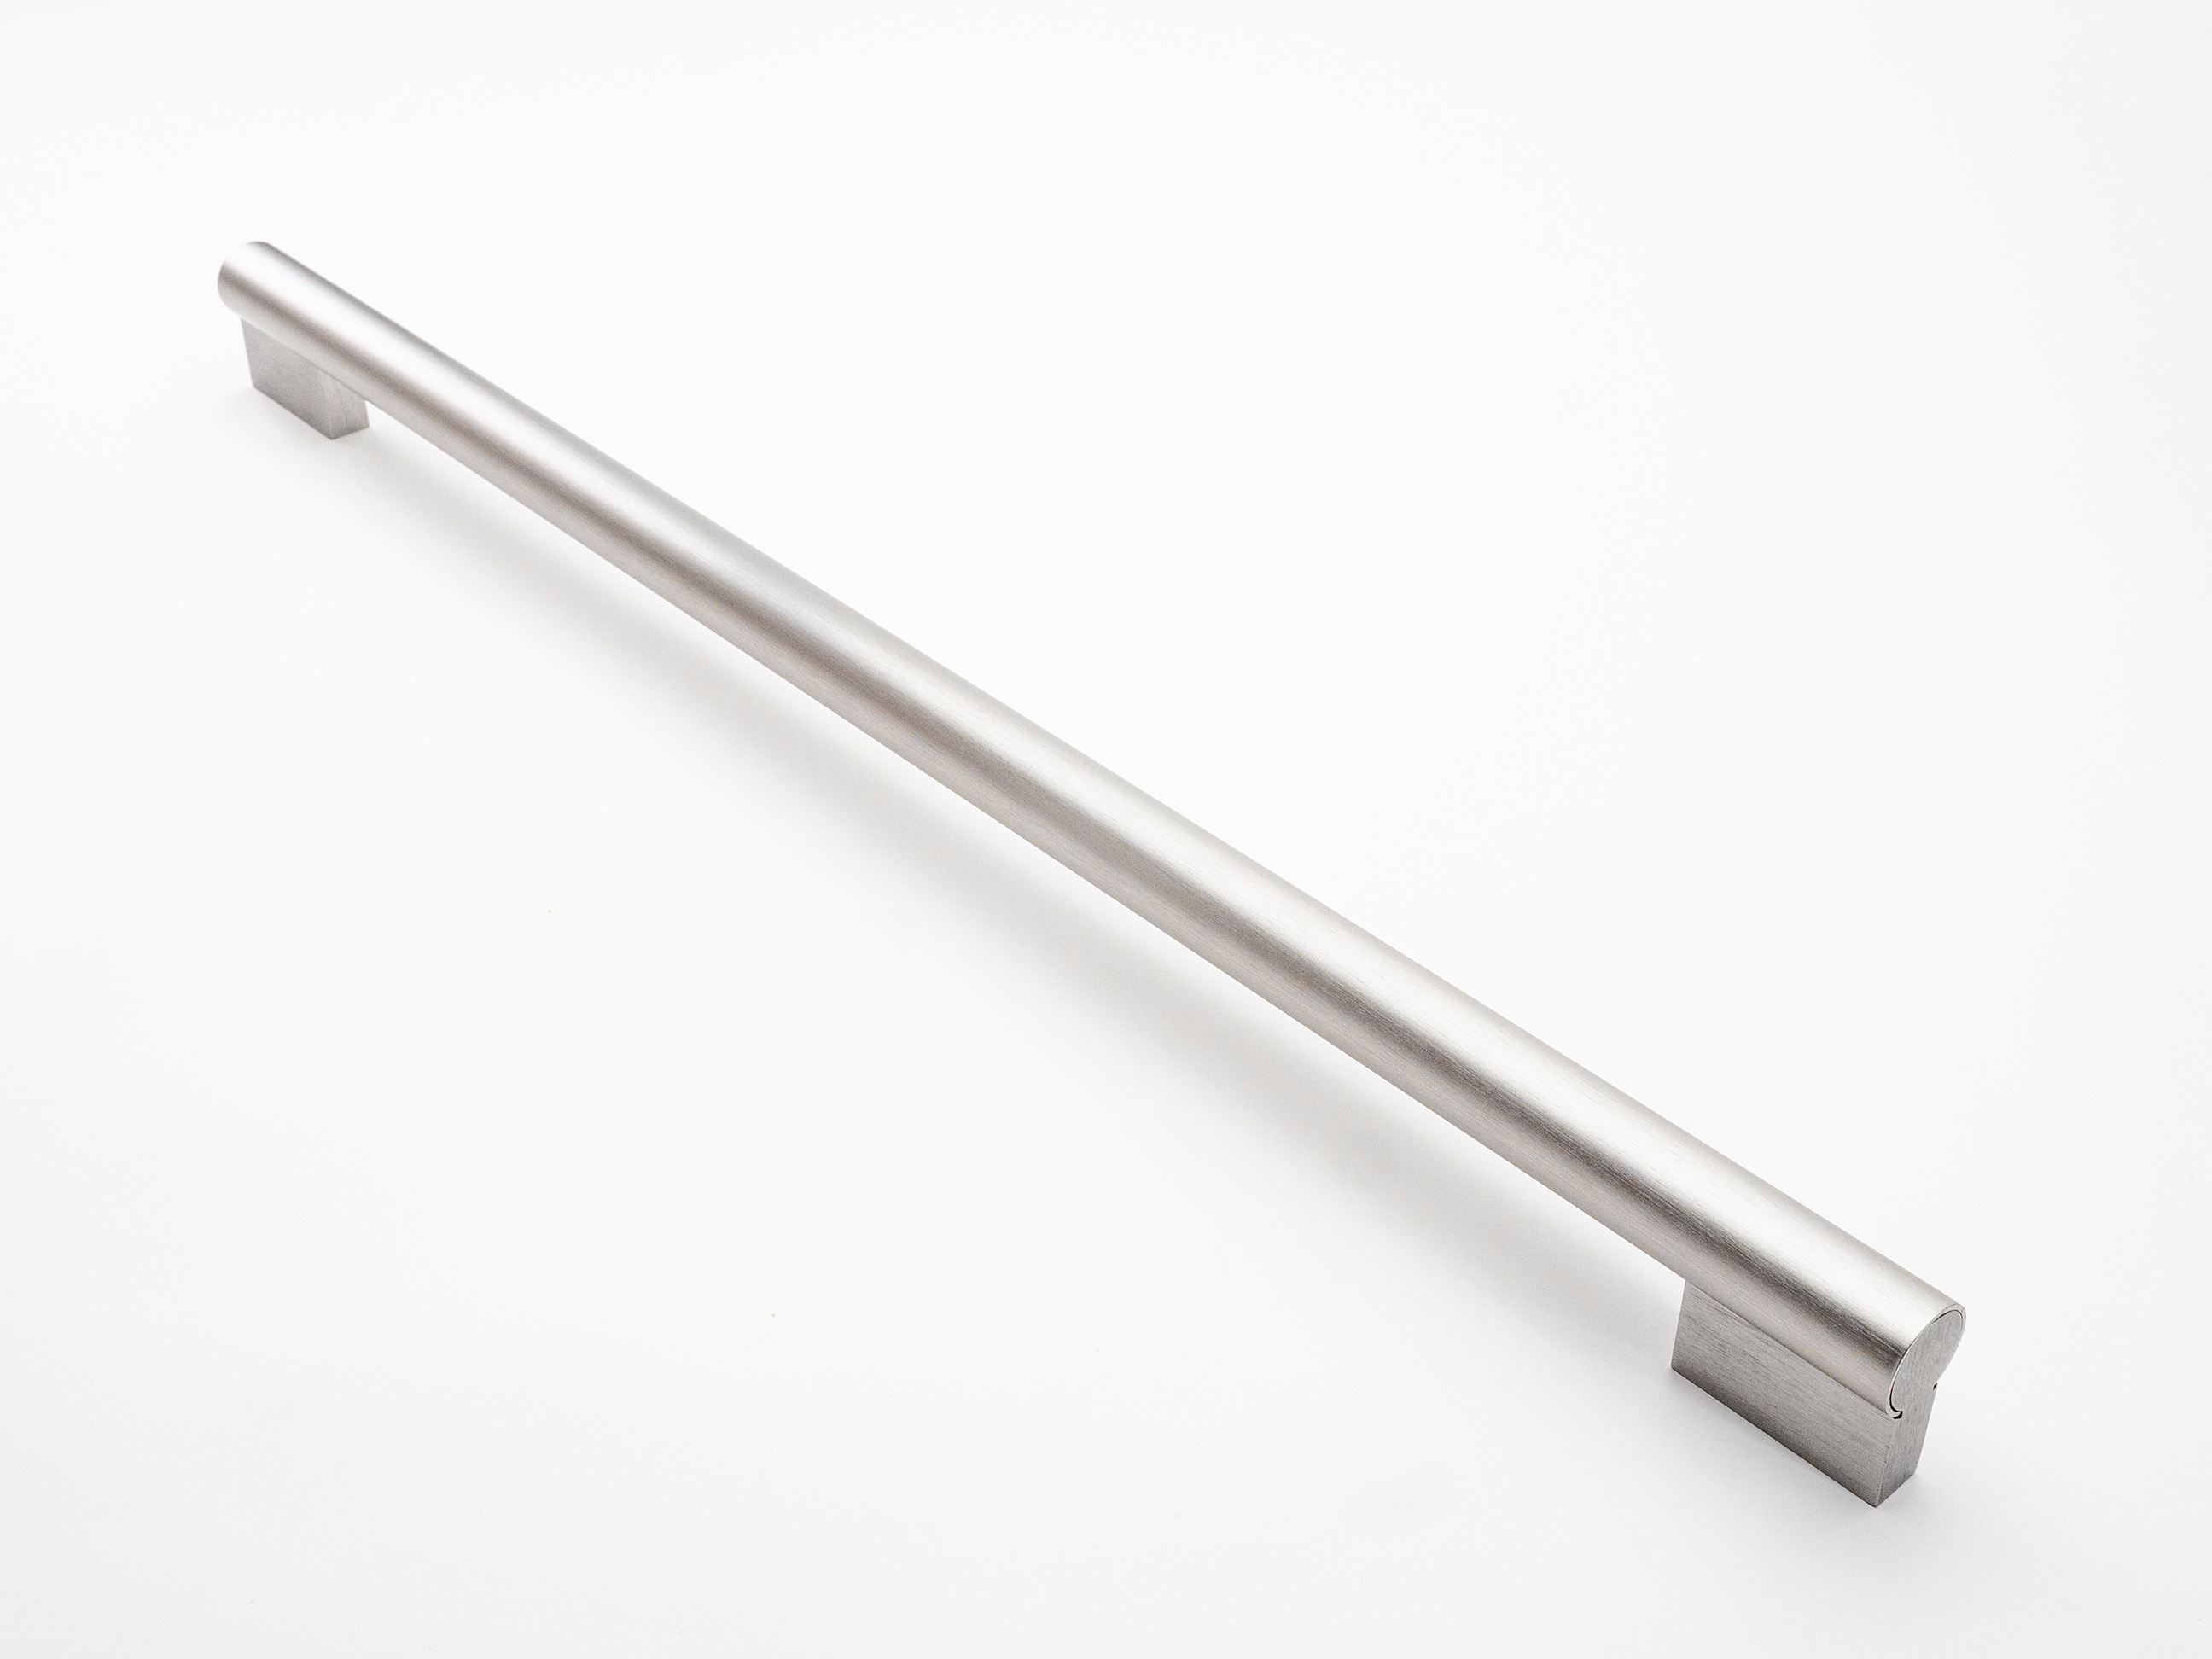 3-Piece tubular oven handle - from extruded aluminium with stainless steel Anodized brushed terminals